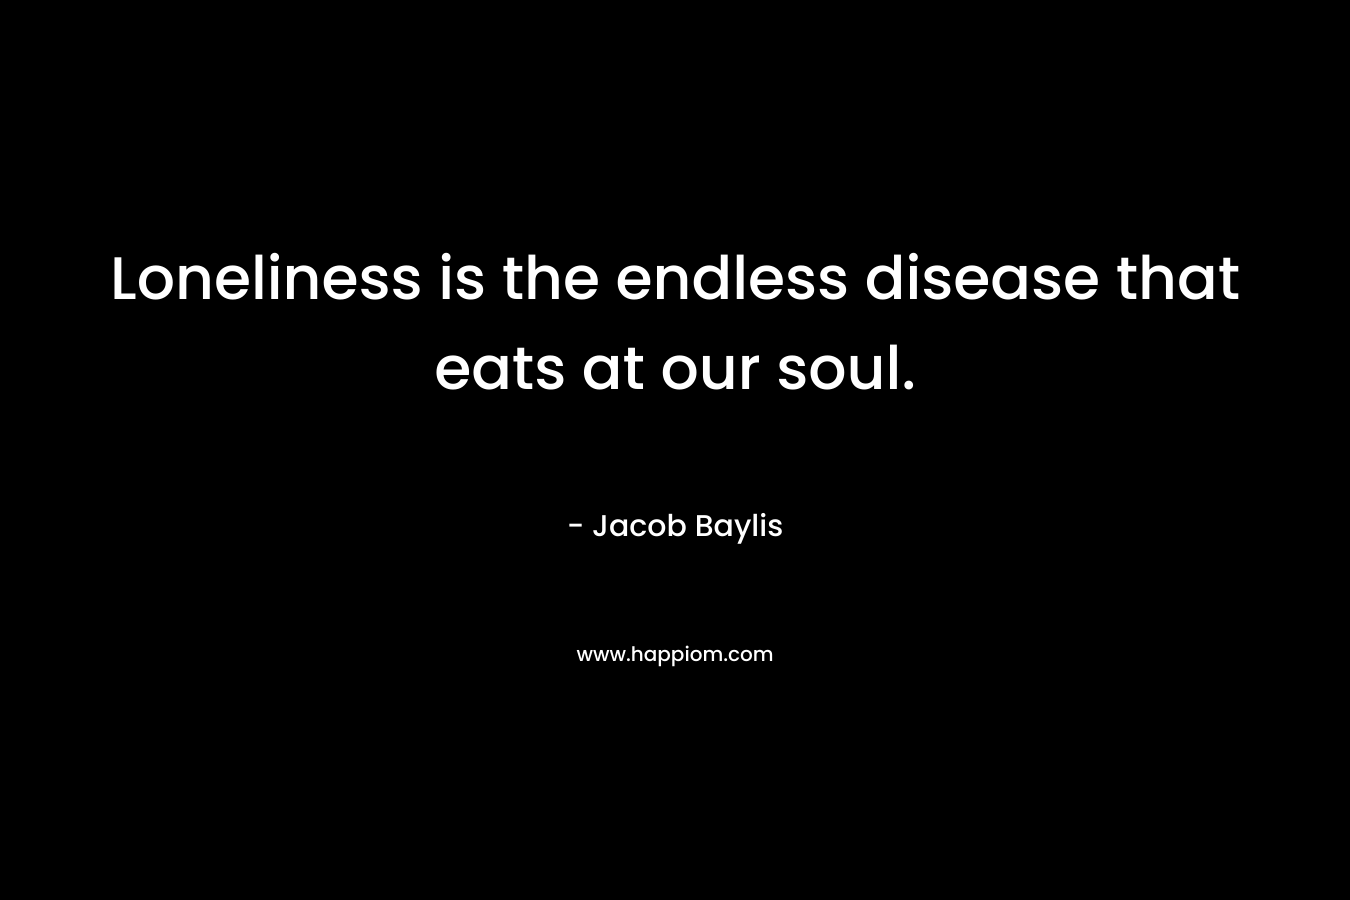 Loneliness is the endless disease that eats at our soul.